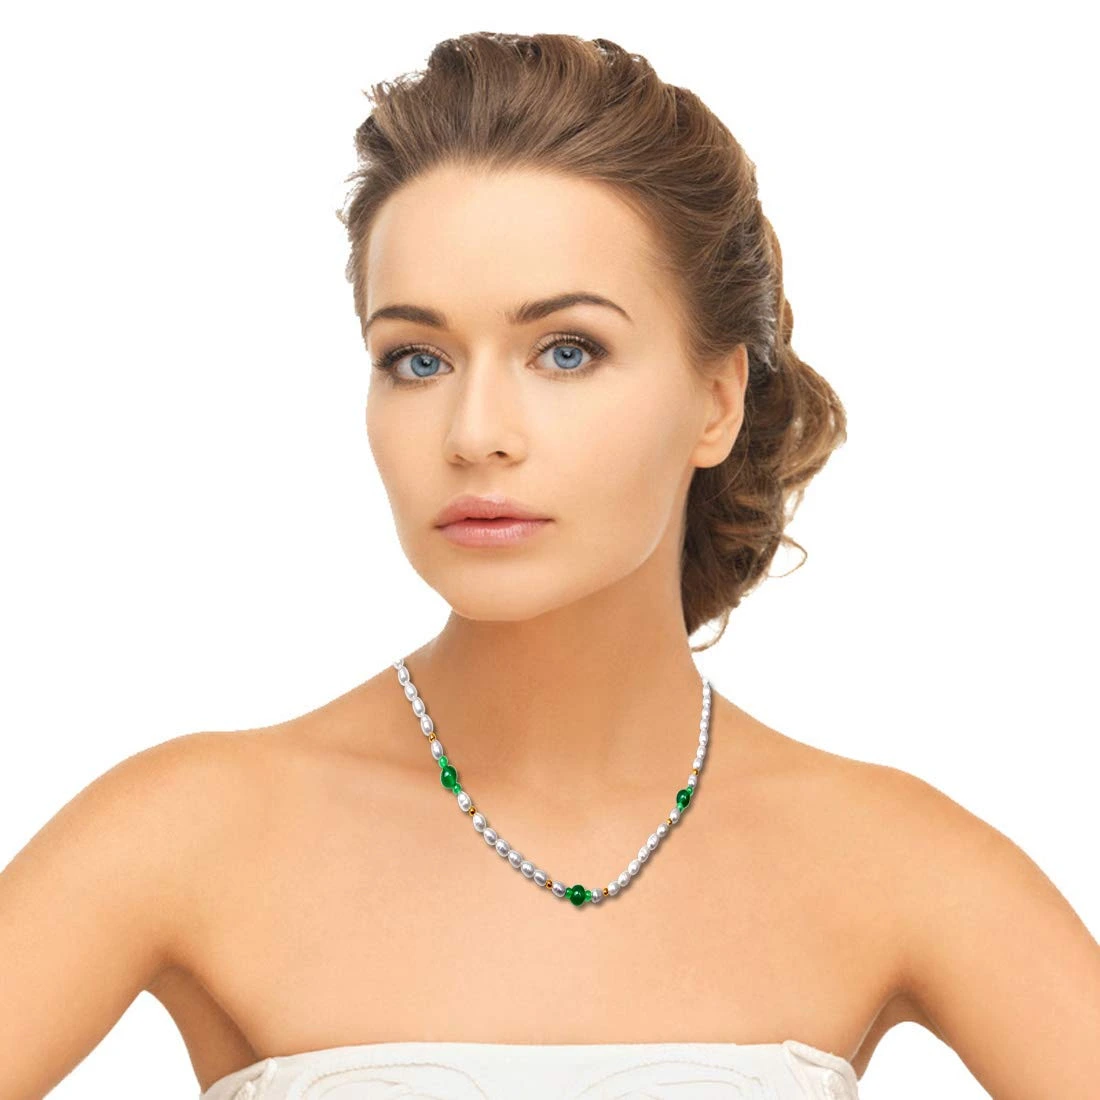 Green n Graceful - Real Rice Pearl & Green Onyx Beads Necklace for Women (SN240)